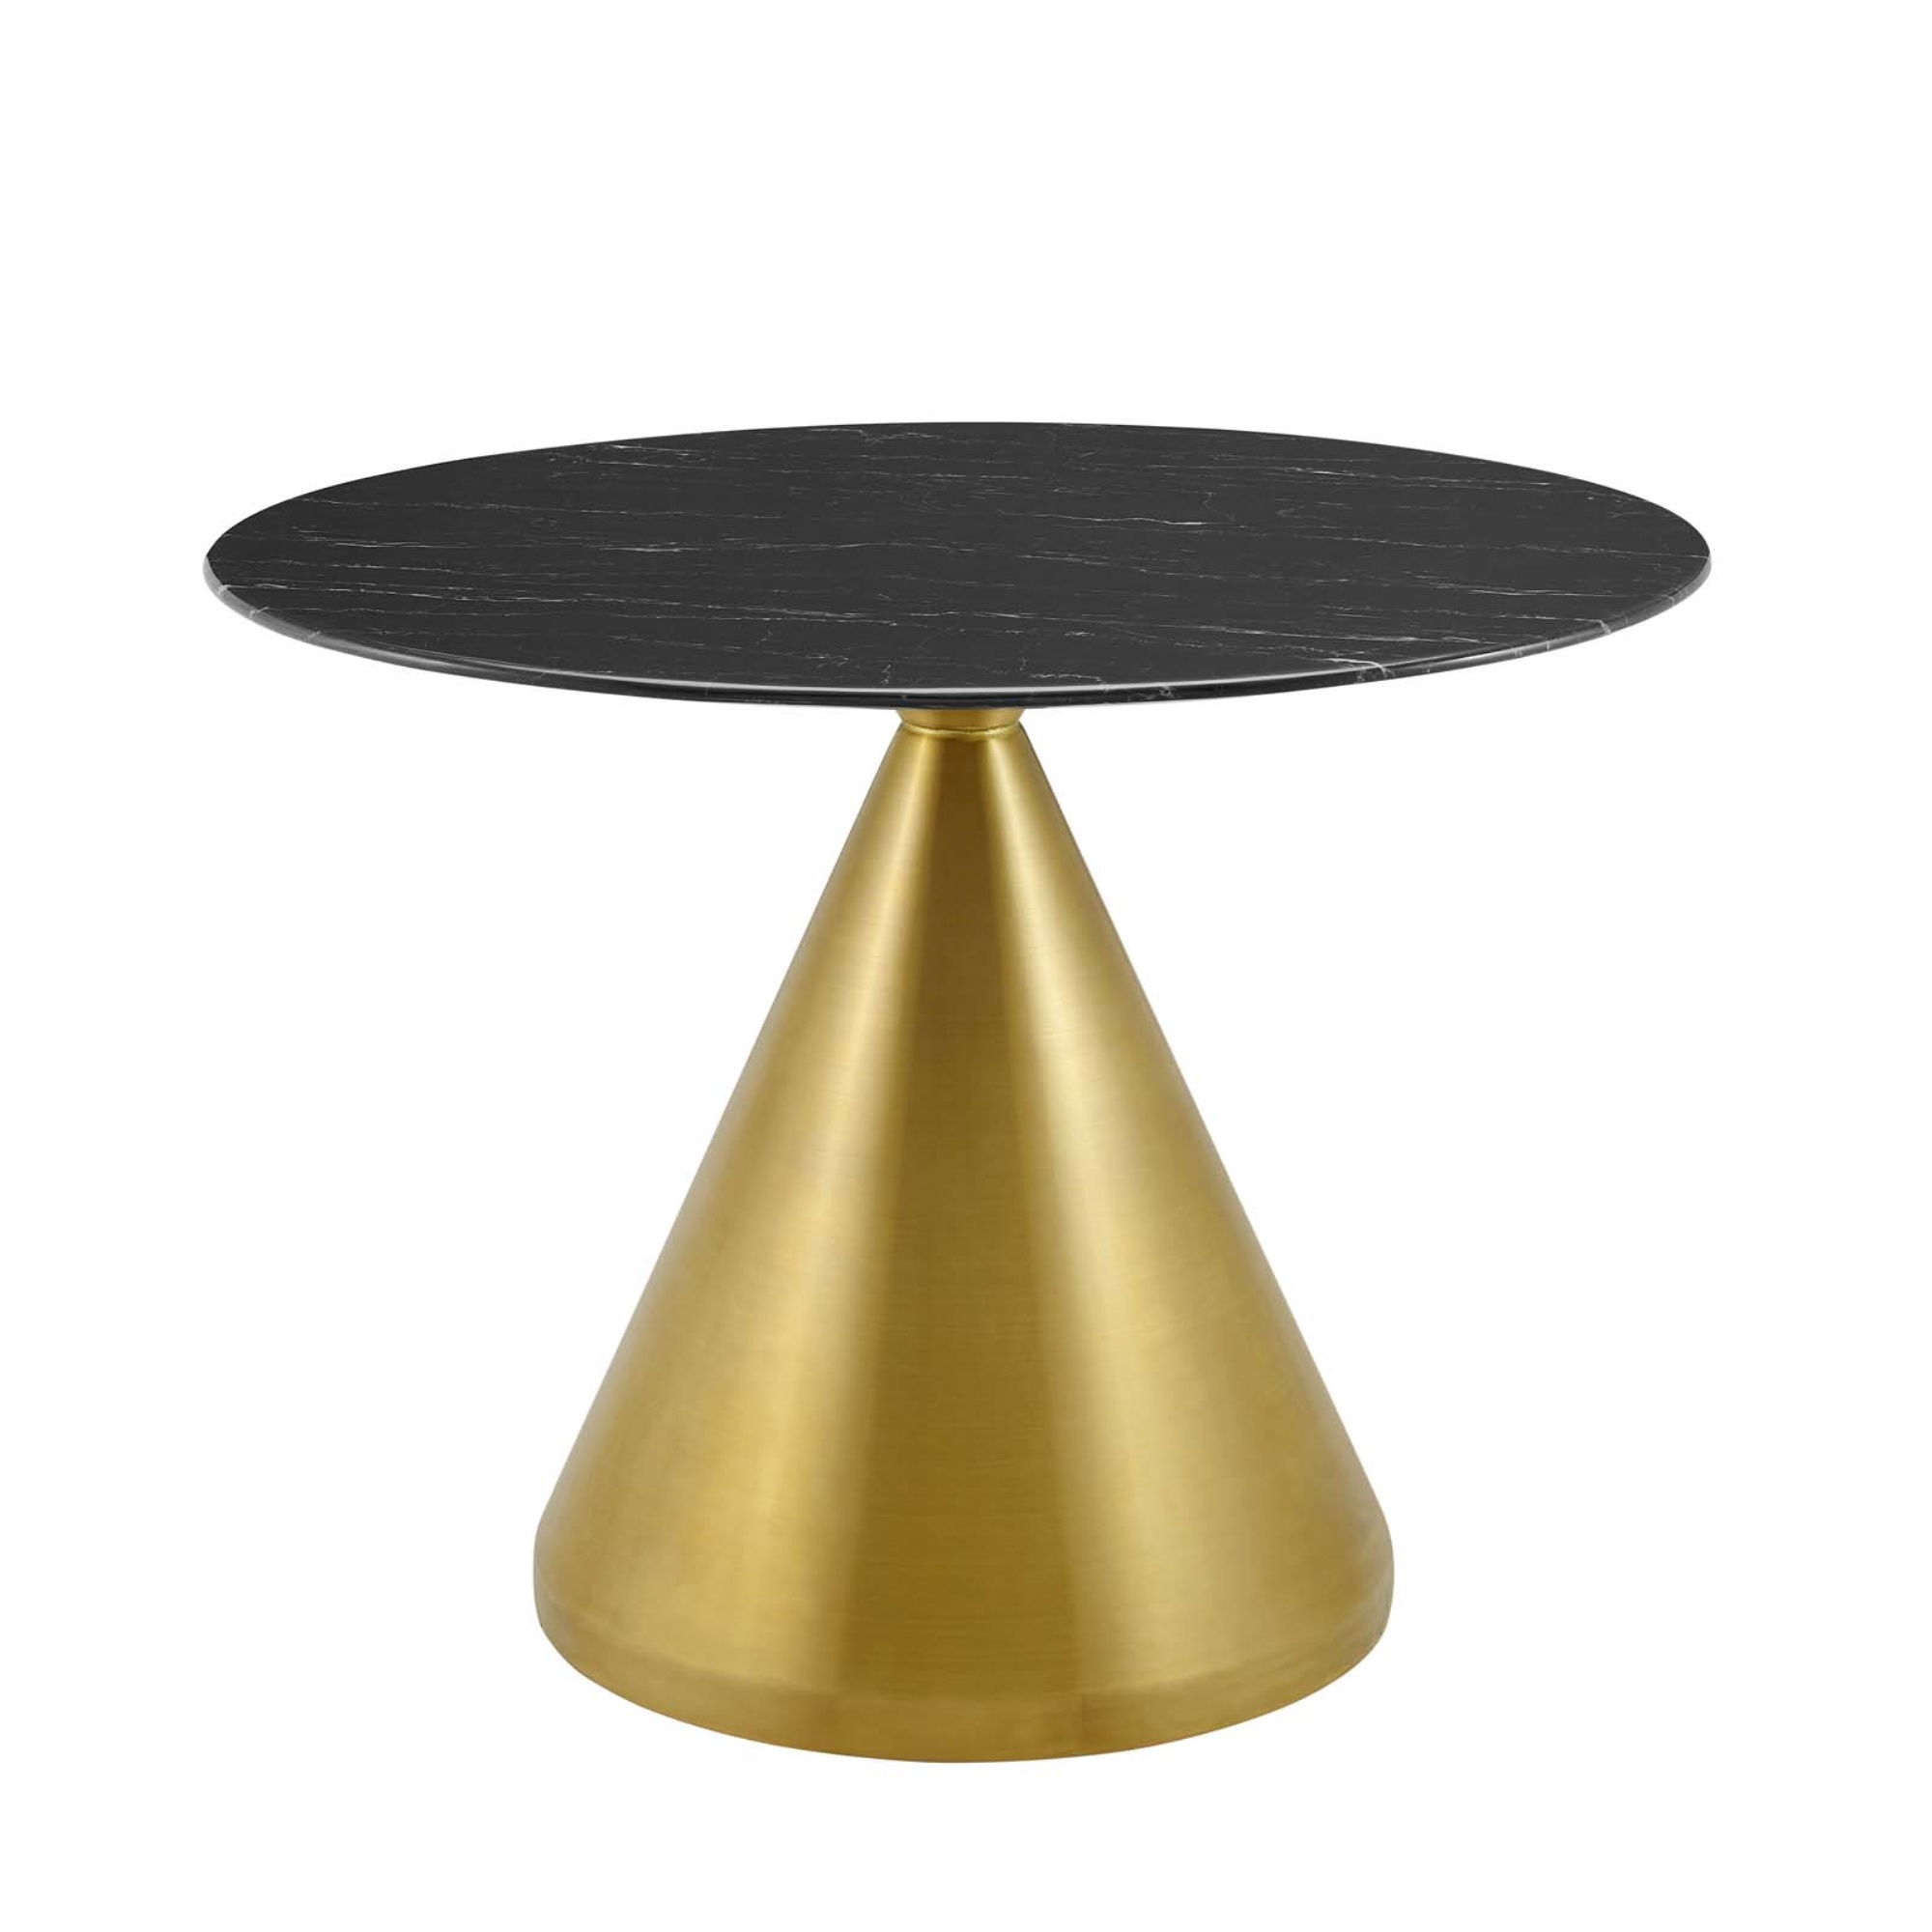 Ergode Tupelo 40" Dining Table - Modern Style, Mid-Century Charm, Polished Gold Metal Base, Easy to Clean Artificial Marble Top